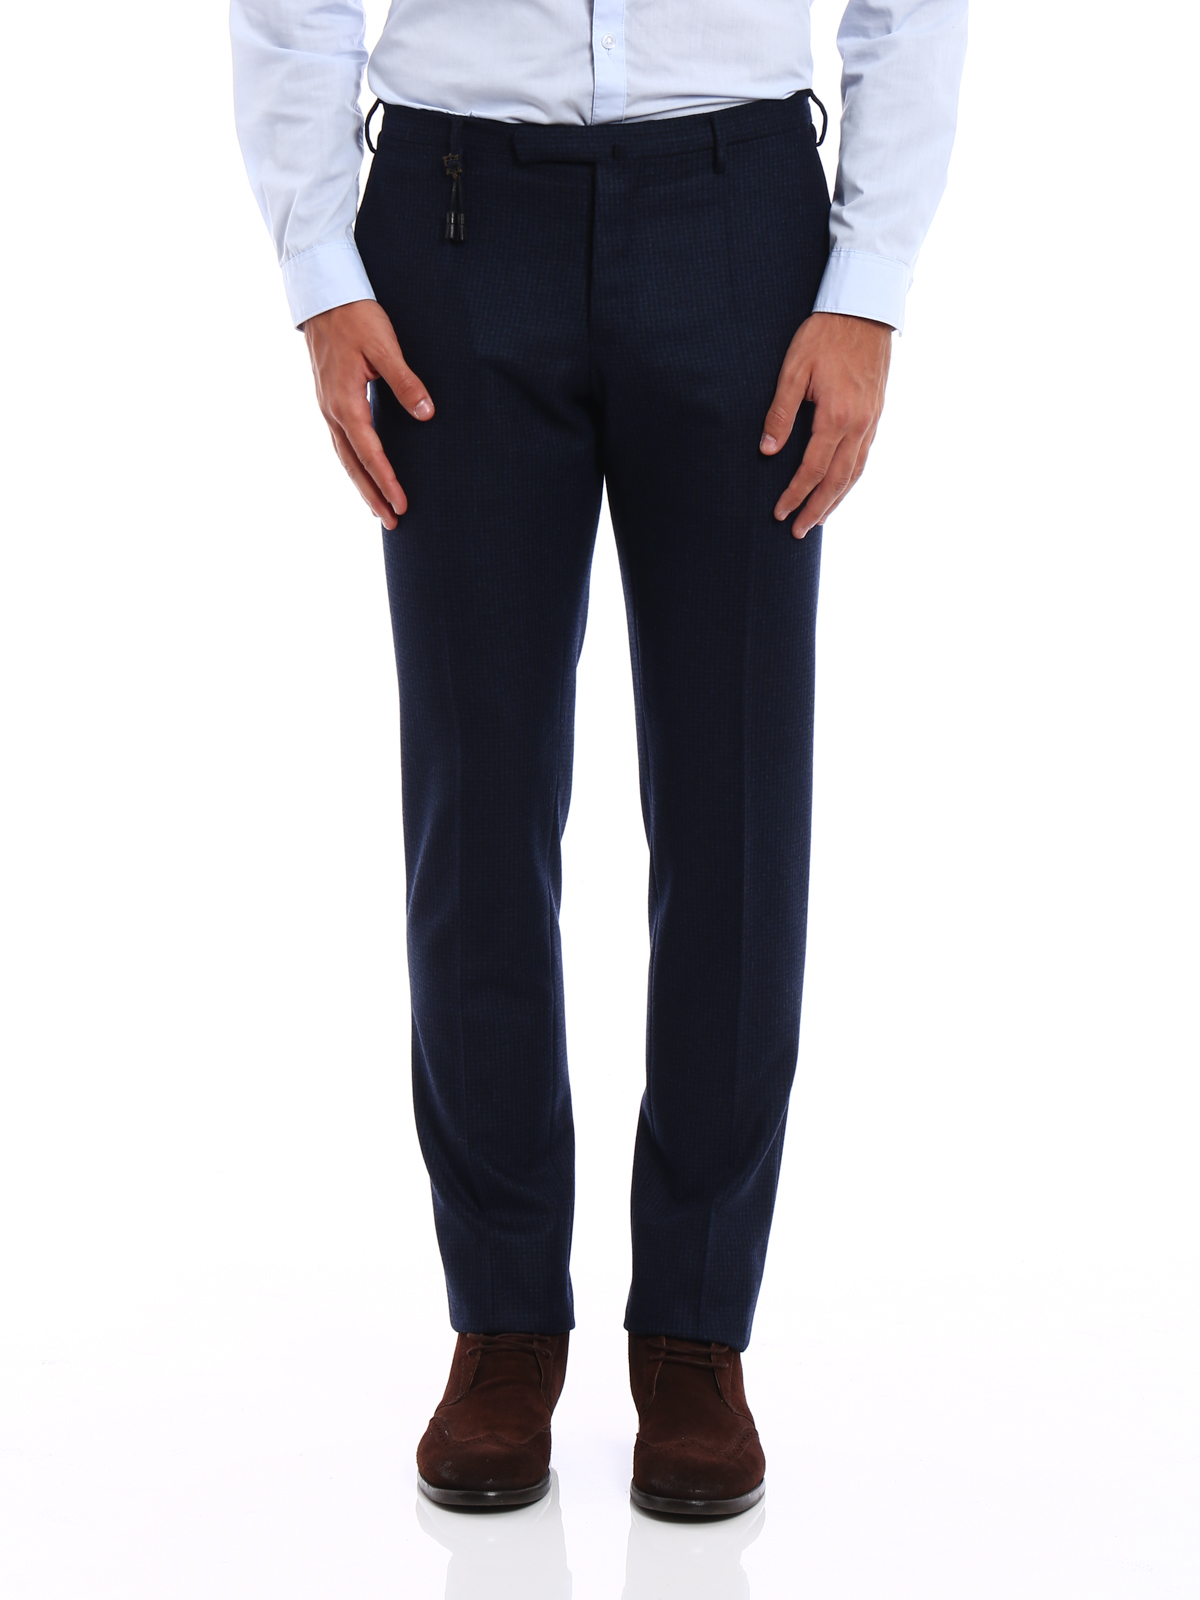 Tailored & Formal trousers Incotex - Super 100's wool flannel